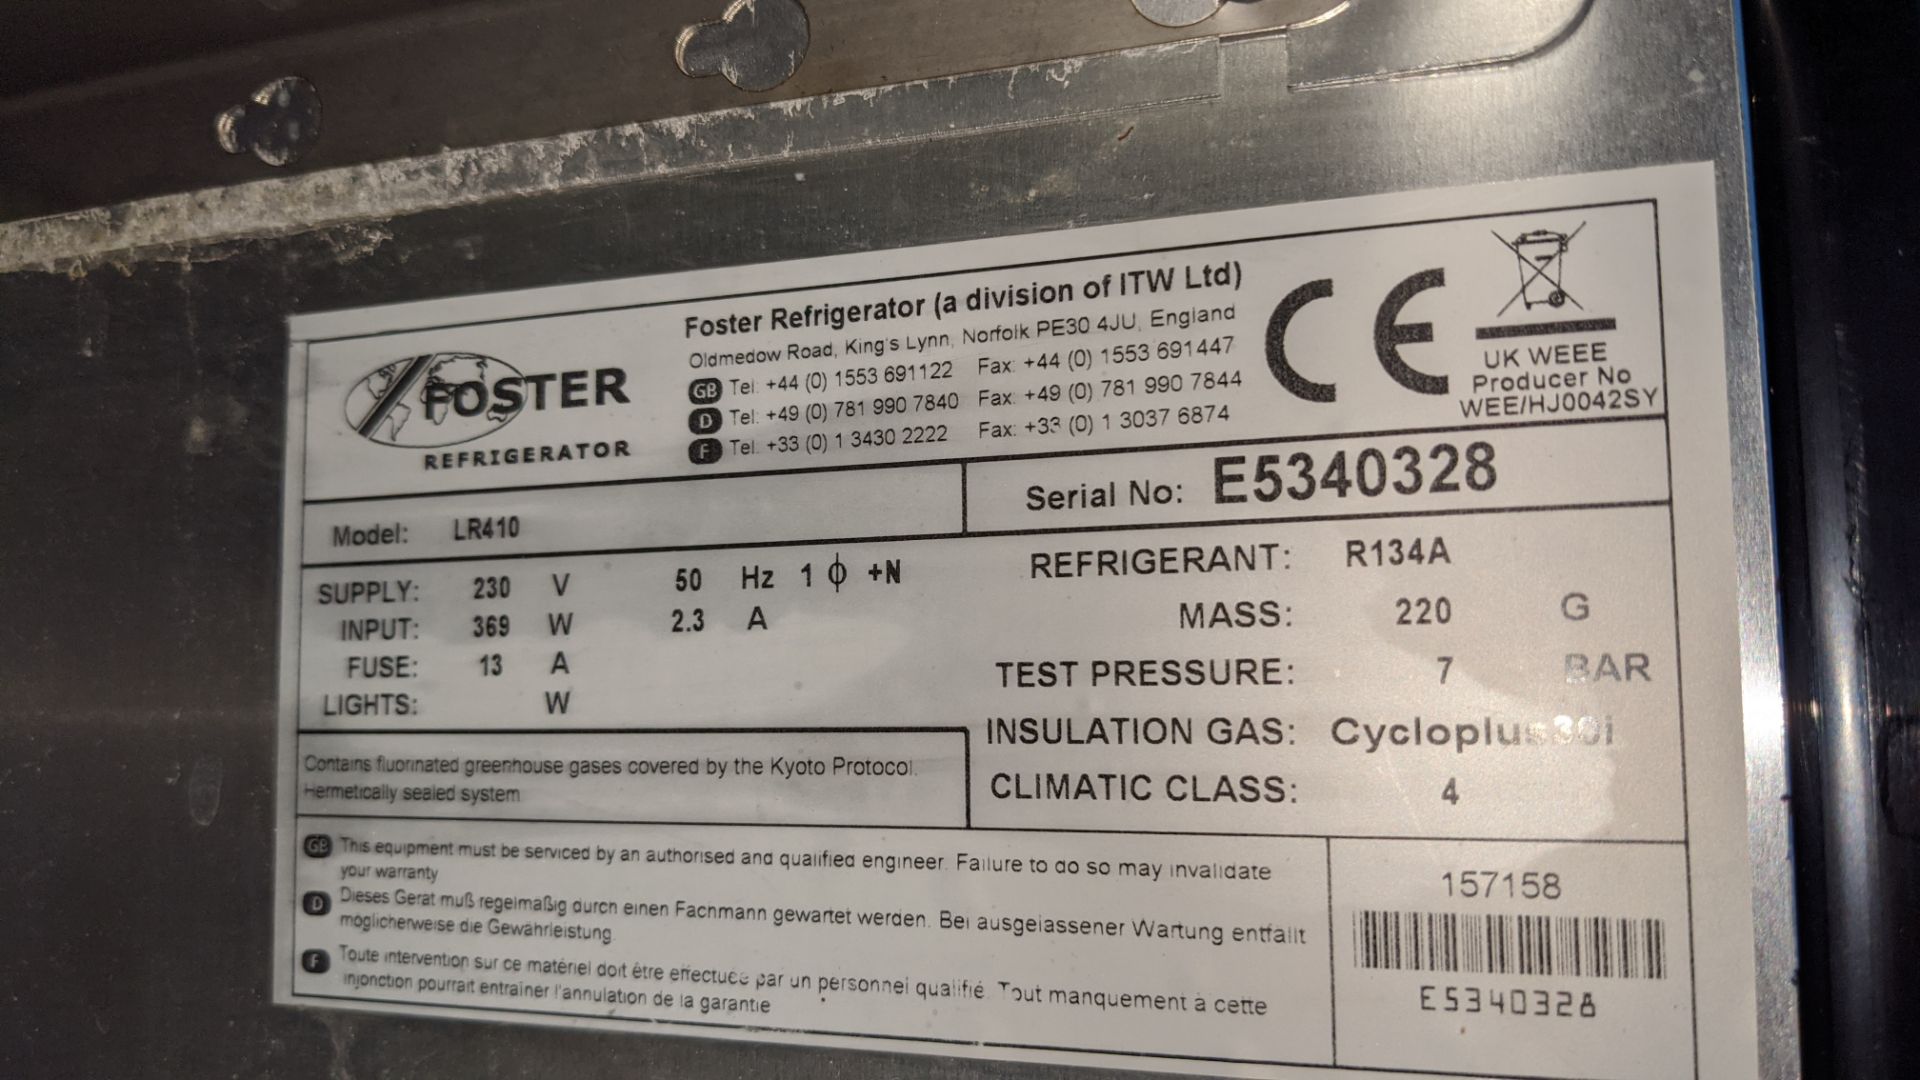 Foster LR410 stainless steel tall commercial freezer - Image 5 of 5